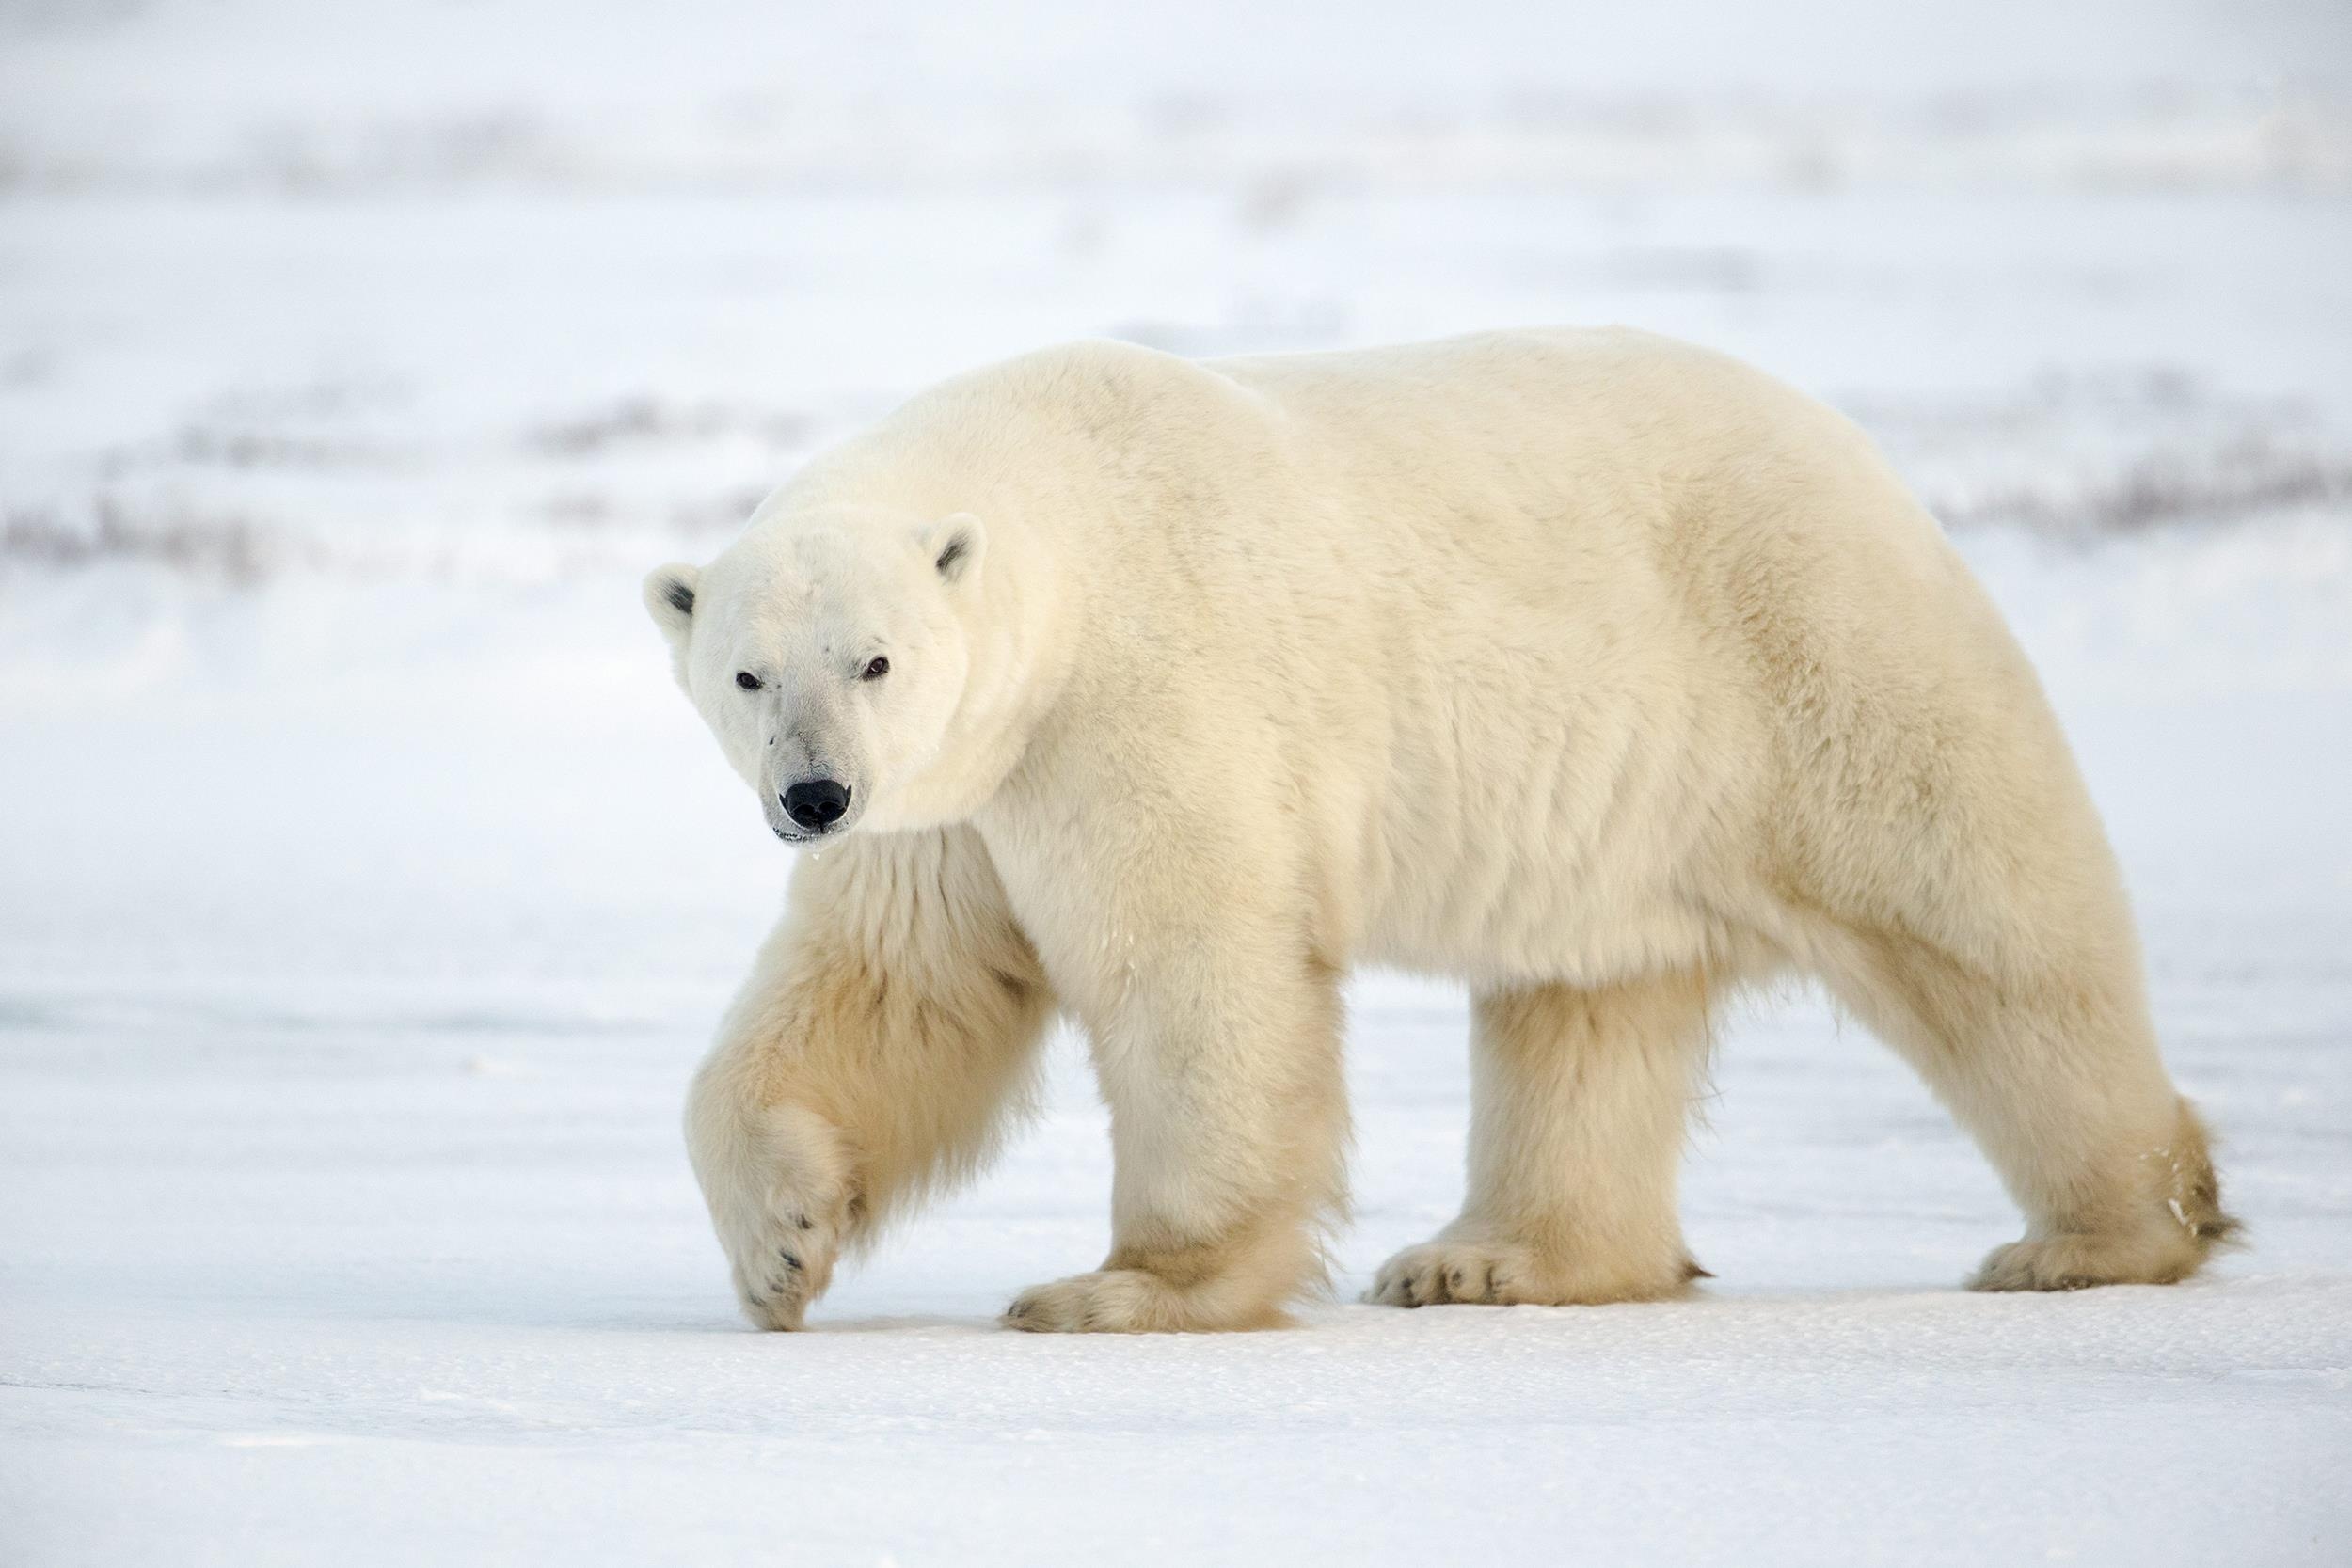 HQ polar bear wallpapers, Stunning photographs, 4K images, Perfect for animal lovers, 2500x1670 HD Desktop